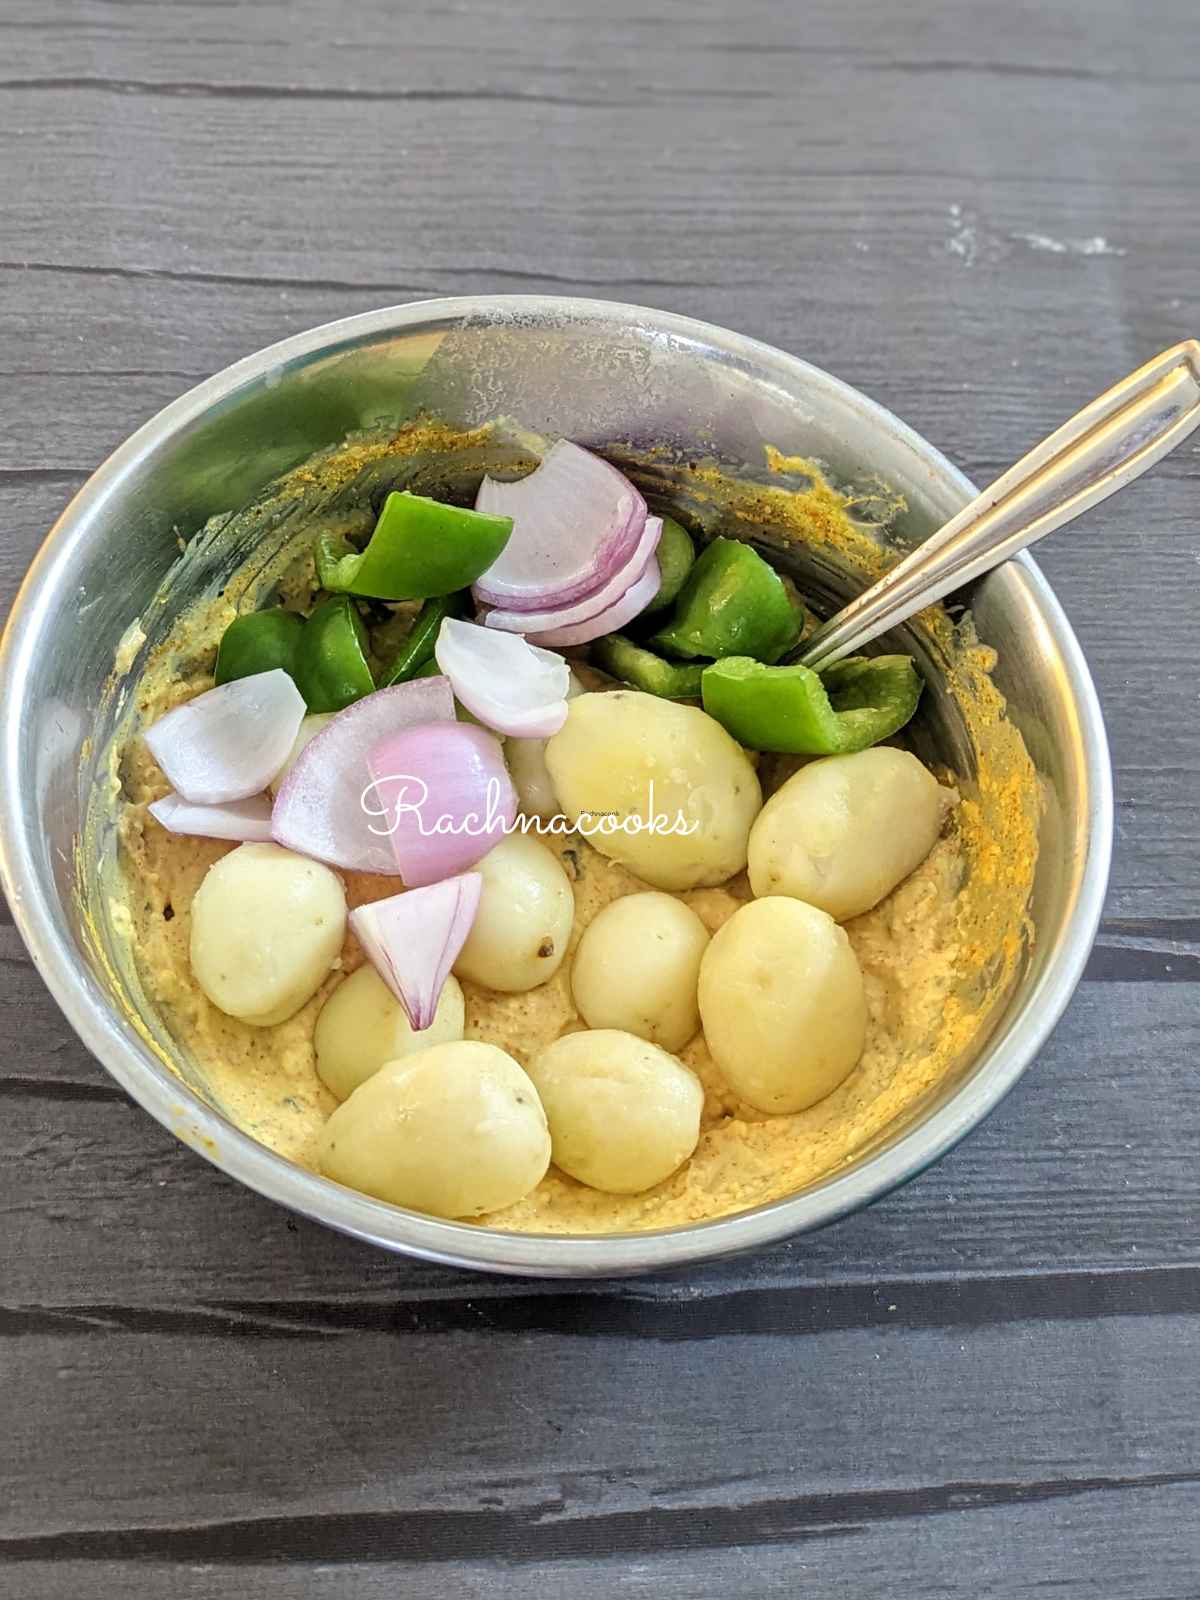 Baby potatoes, onion and green pepper being marinated in a thick marinade.